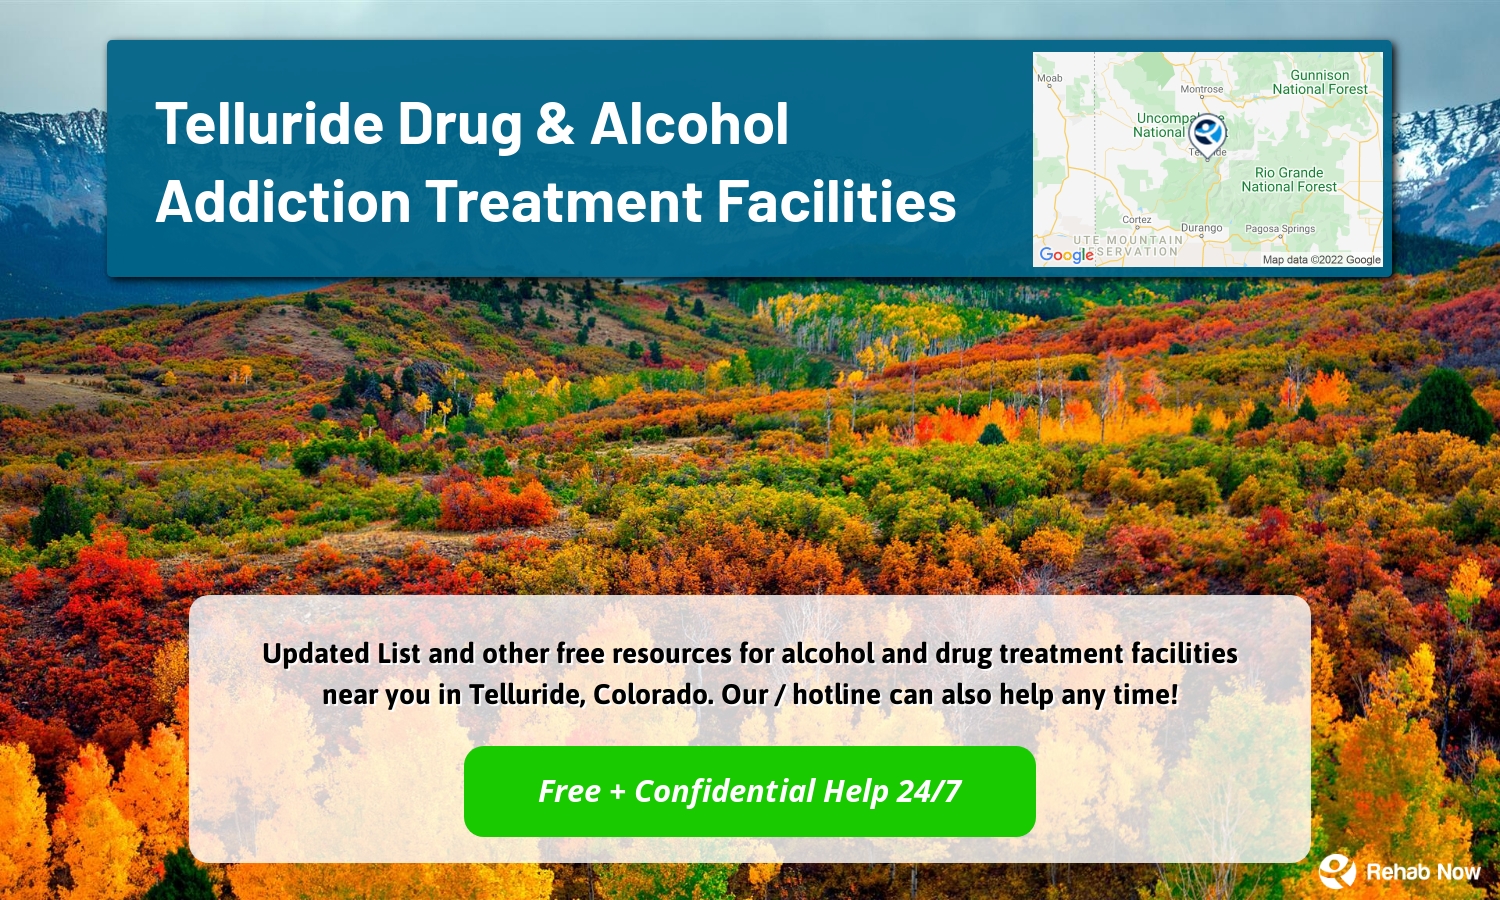  Updated List and other free resources for alcohol and drug treatment facilities near you in Telluride, Colorado. Our / hotline can also help any time!